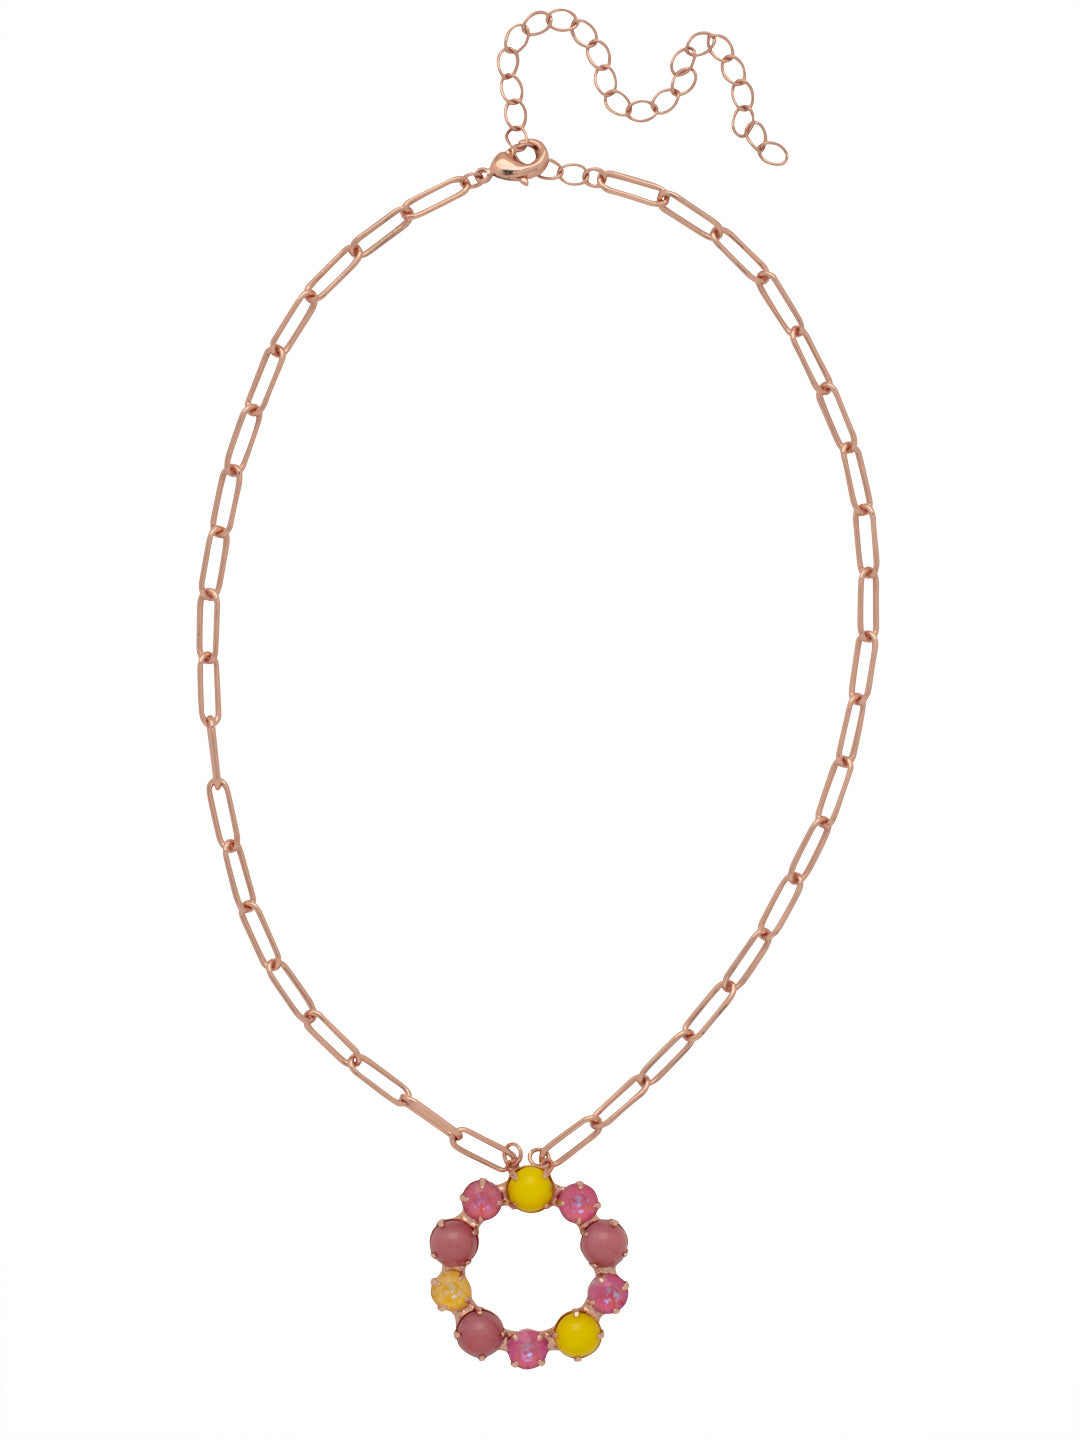 Xena Paperclip Pendant Necklace - NFF11RGPPN - <p>The Xena Paperclip Pendant Necklace features a wreath of semi-precious stones at the base of a trendy, adjustable paperclip chain, secured by a lobster claw clasp. From Sorrelli's Pink Pineapple collection in our Rose Gold-tone finish.</p>